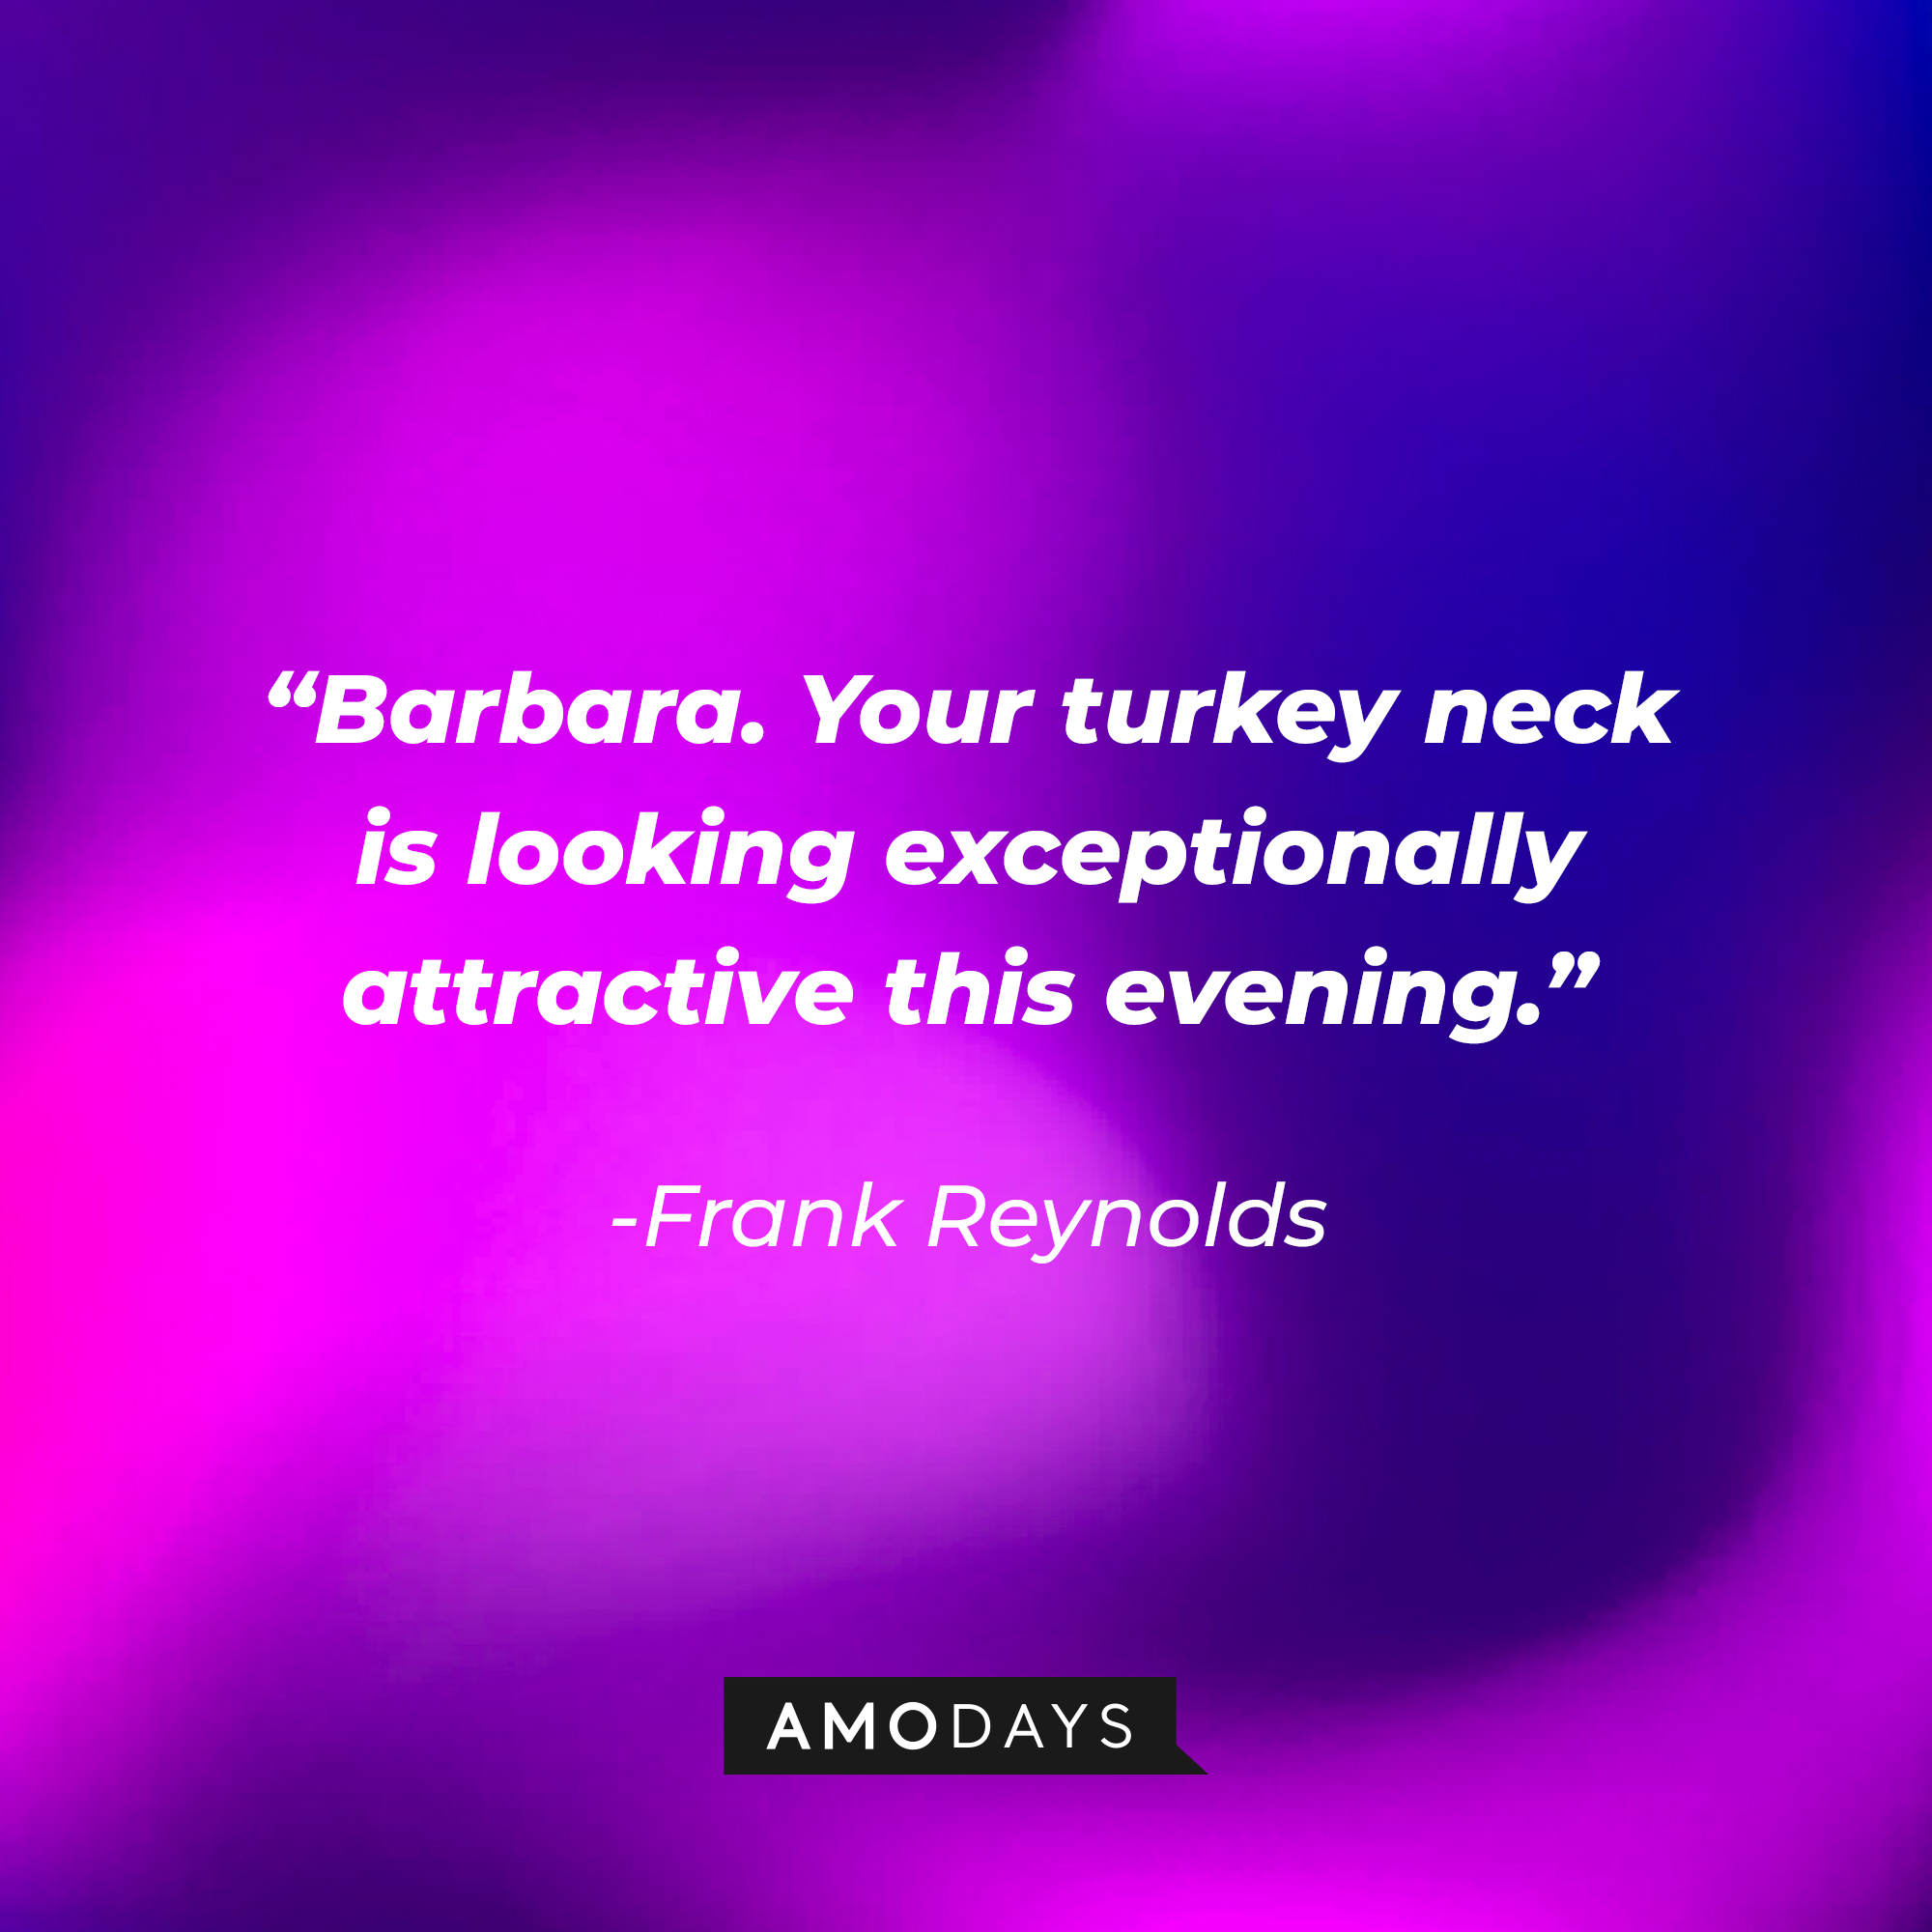 Frank Reynolds quote: “Barbara. Your turkey neck is looking exceptionally attractive this evening.” | Source: facebook.com/alwayssunny